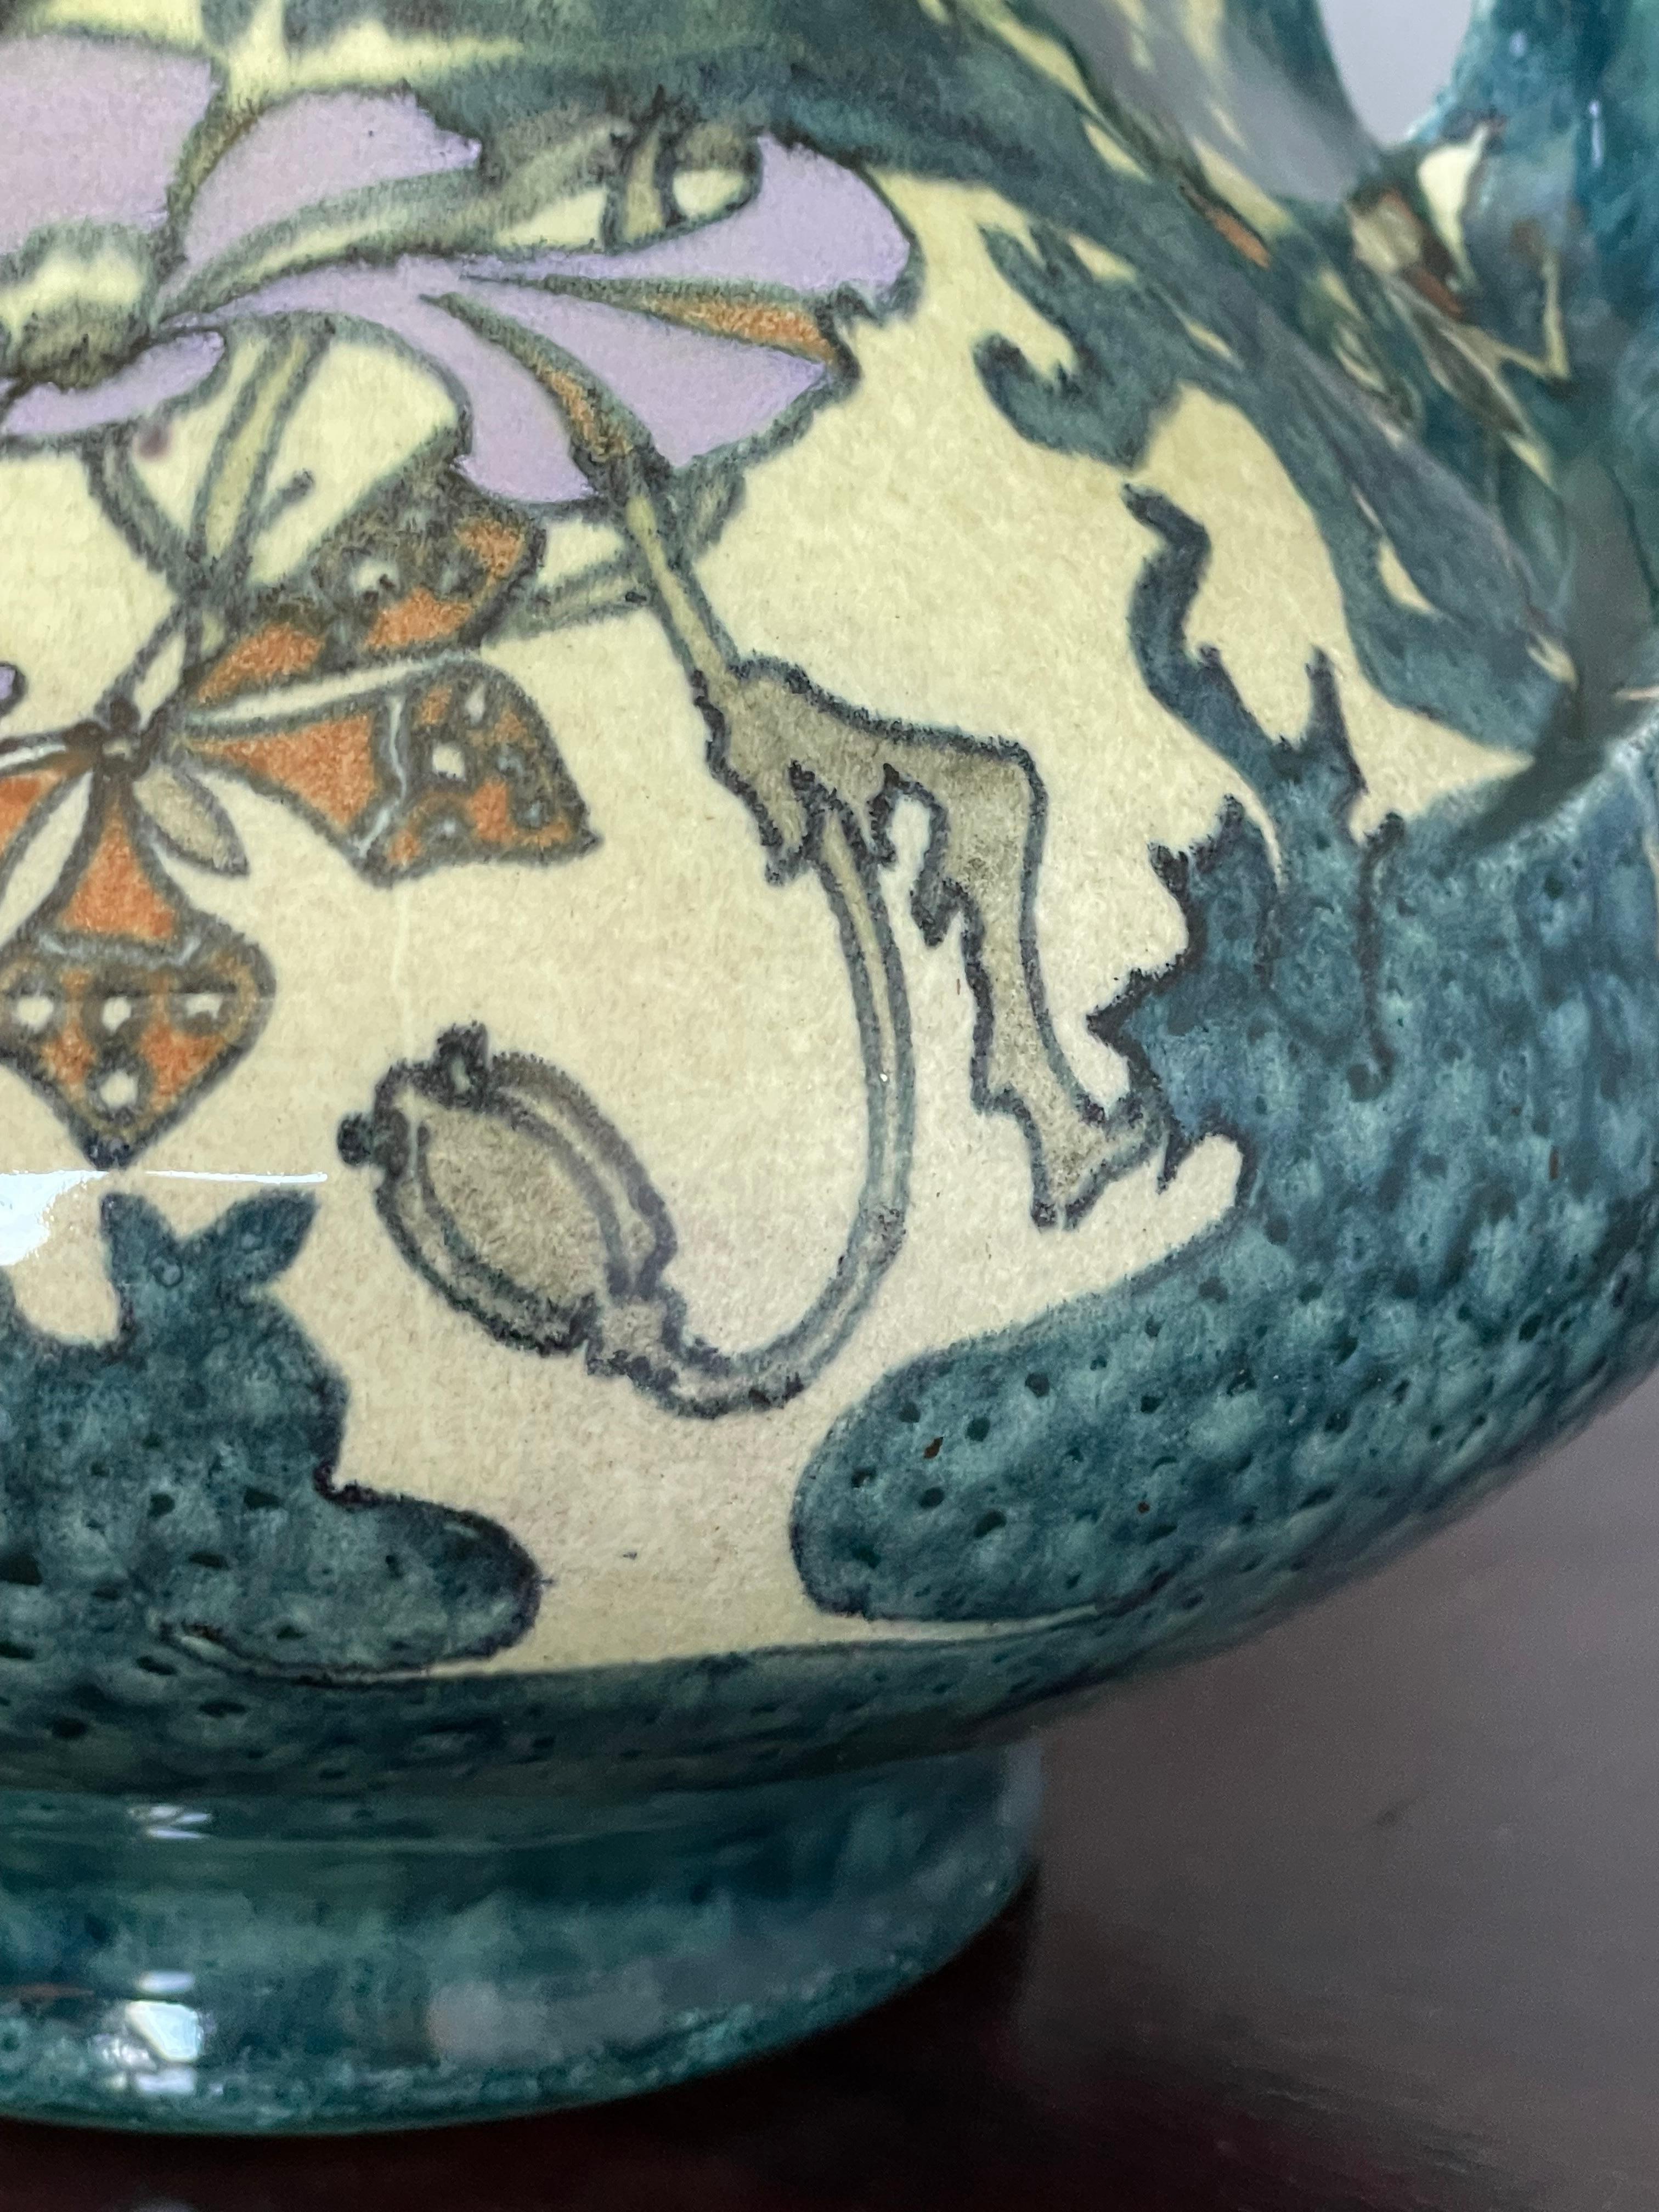 Stunning Dutch Arts and Crafts Hand Painted W. Butterflies Vase by J. Mijnlieff For Sale 11